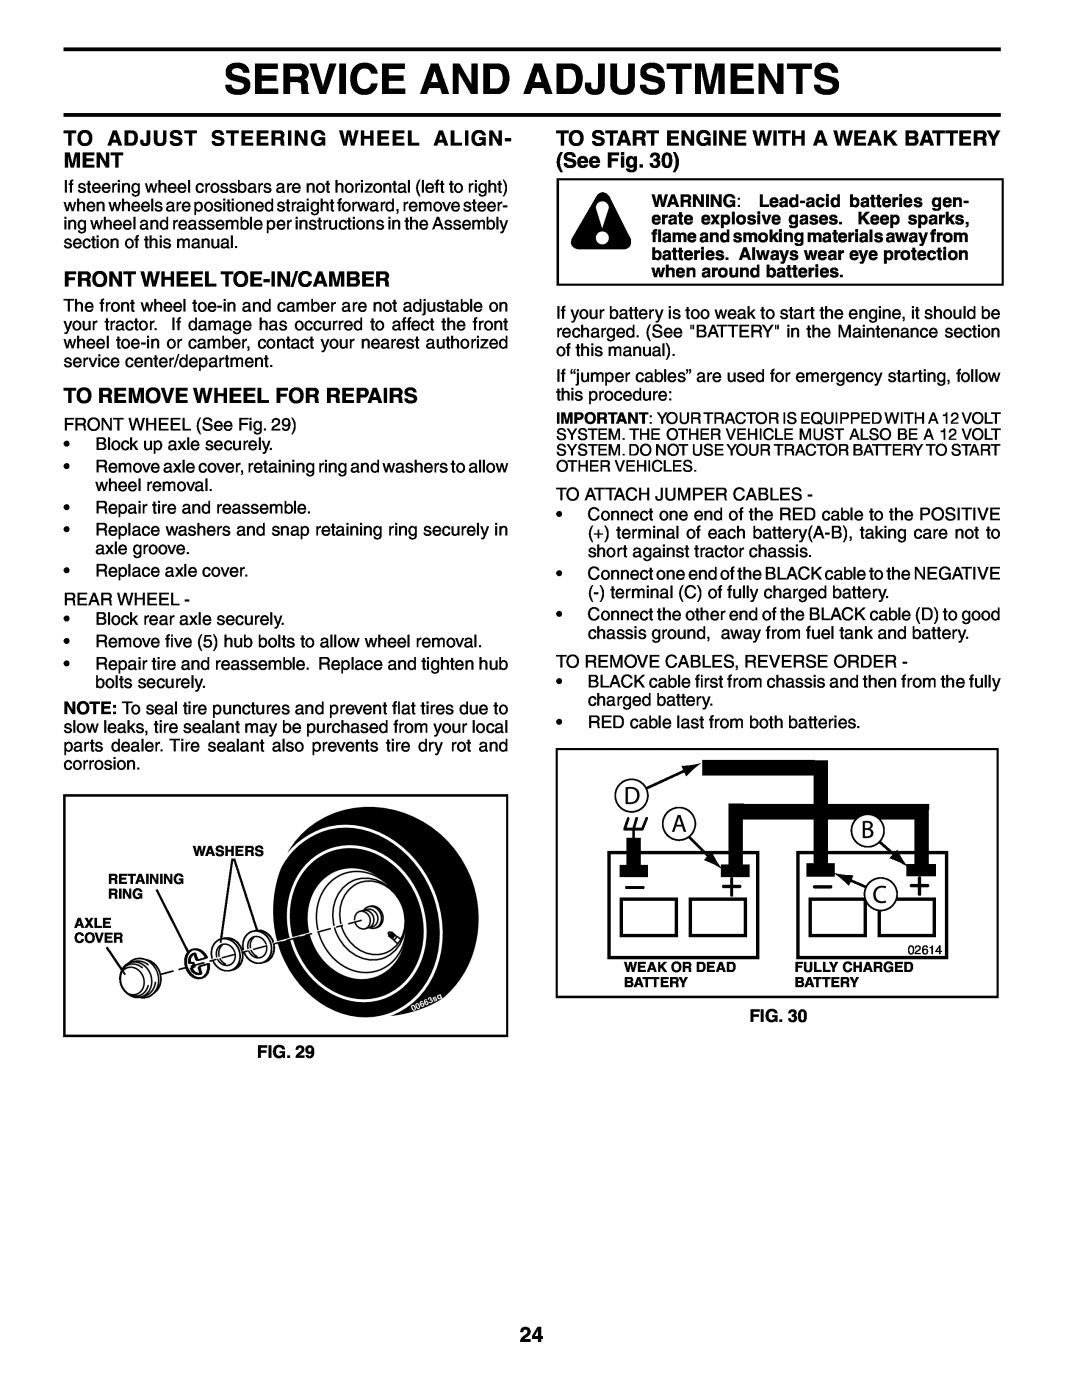 Poulan PDGT26H48C owner manual To Adjust Steering Wheel Align- Ment, Front Wheel Toe-In/Camber, To Remove Wheel For Repairs 